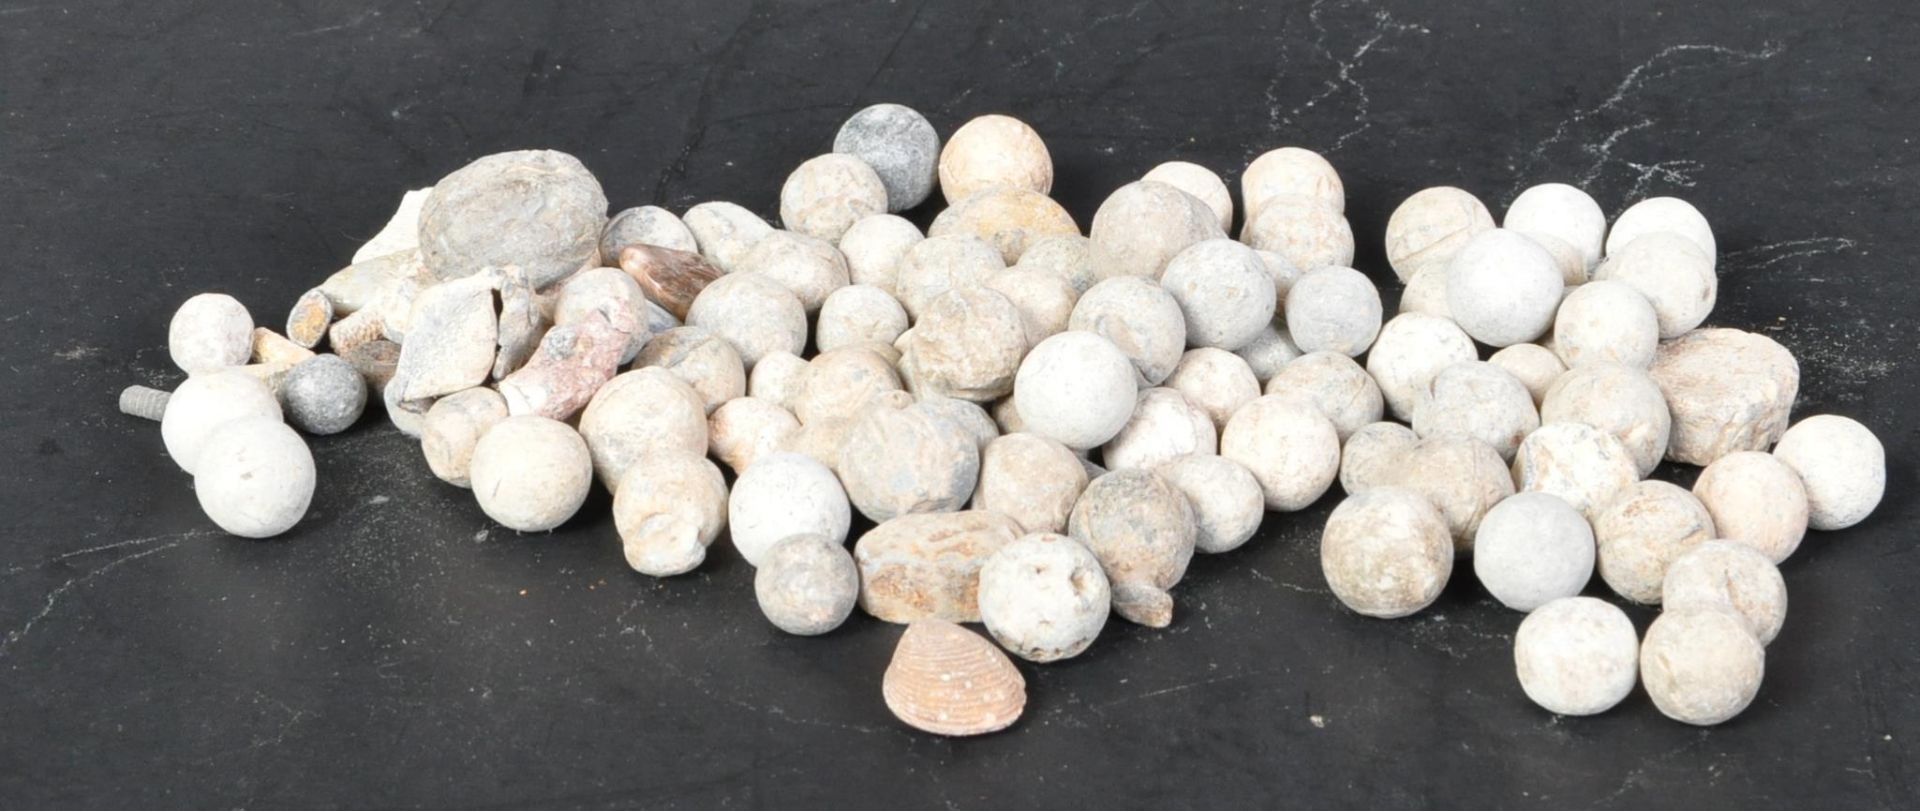 COLLECTION OF 1685 MUSKET BALLS (MONMOUTH REBELLION) - Image 2 of 3